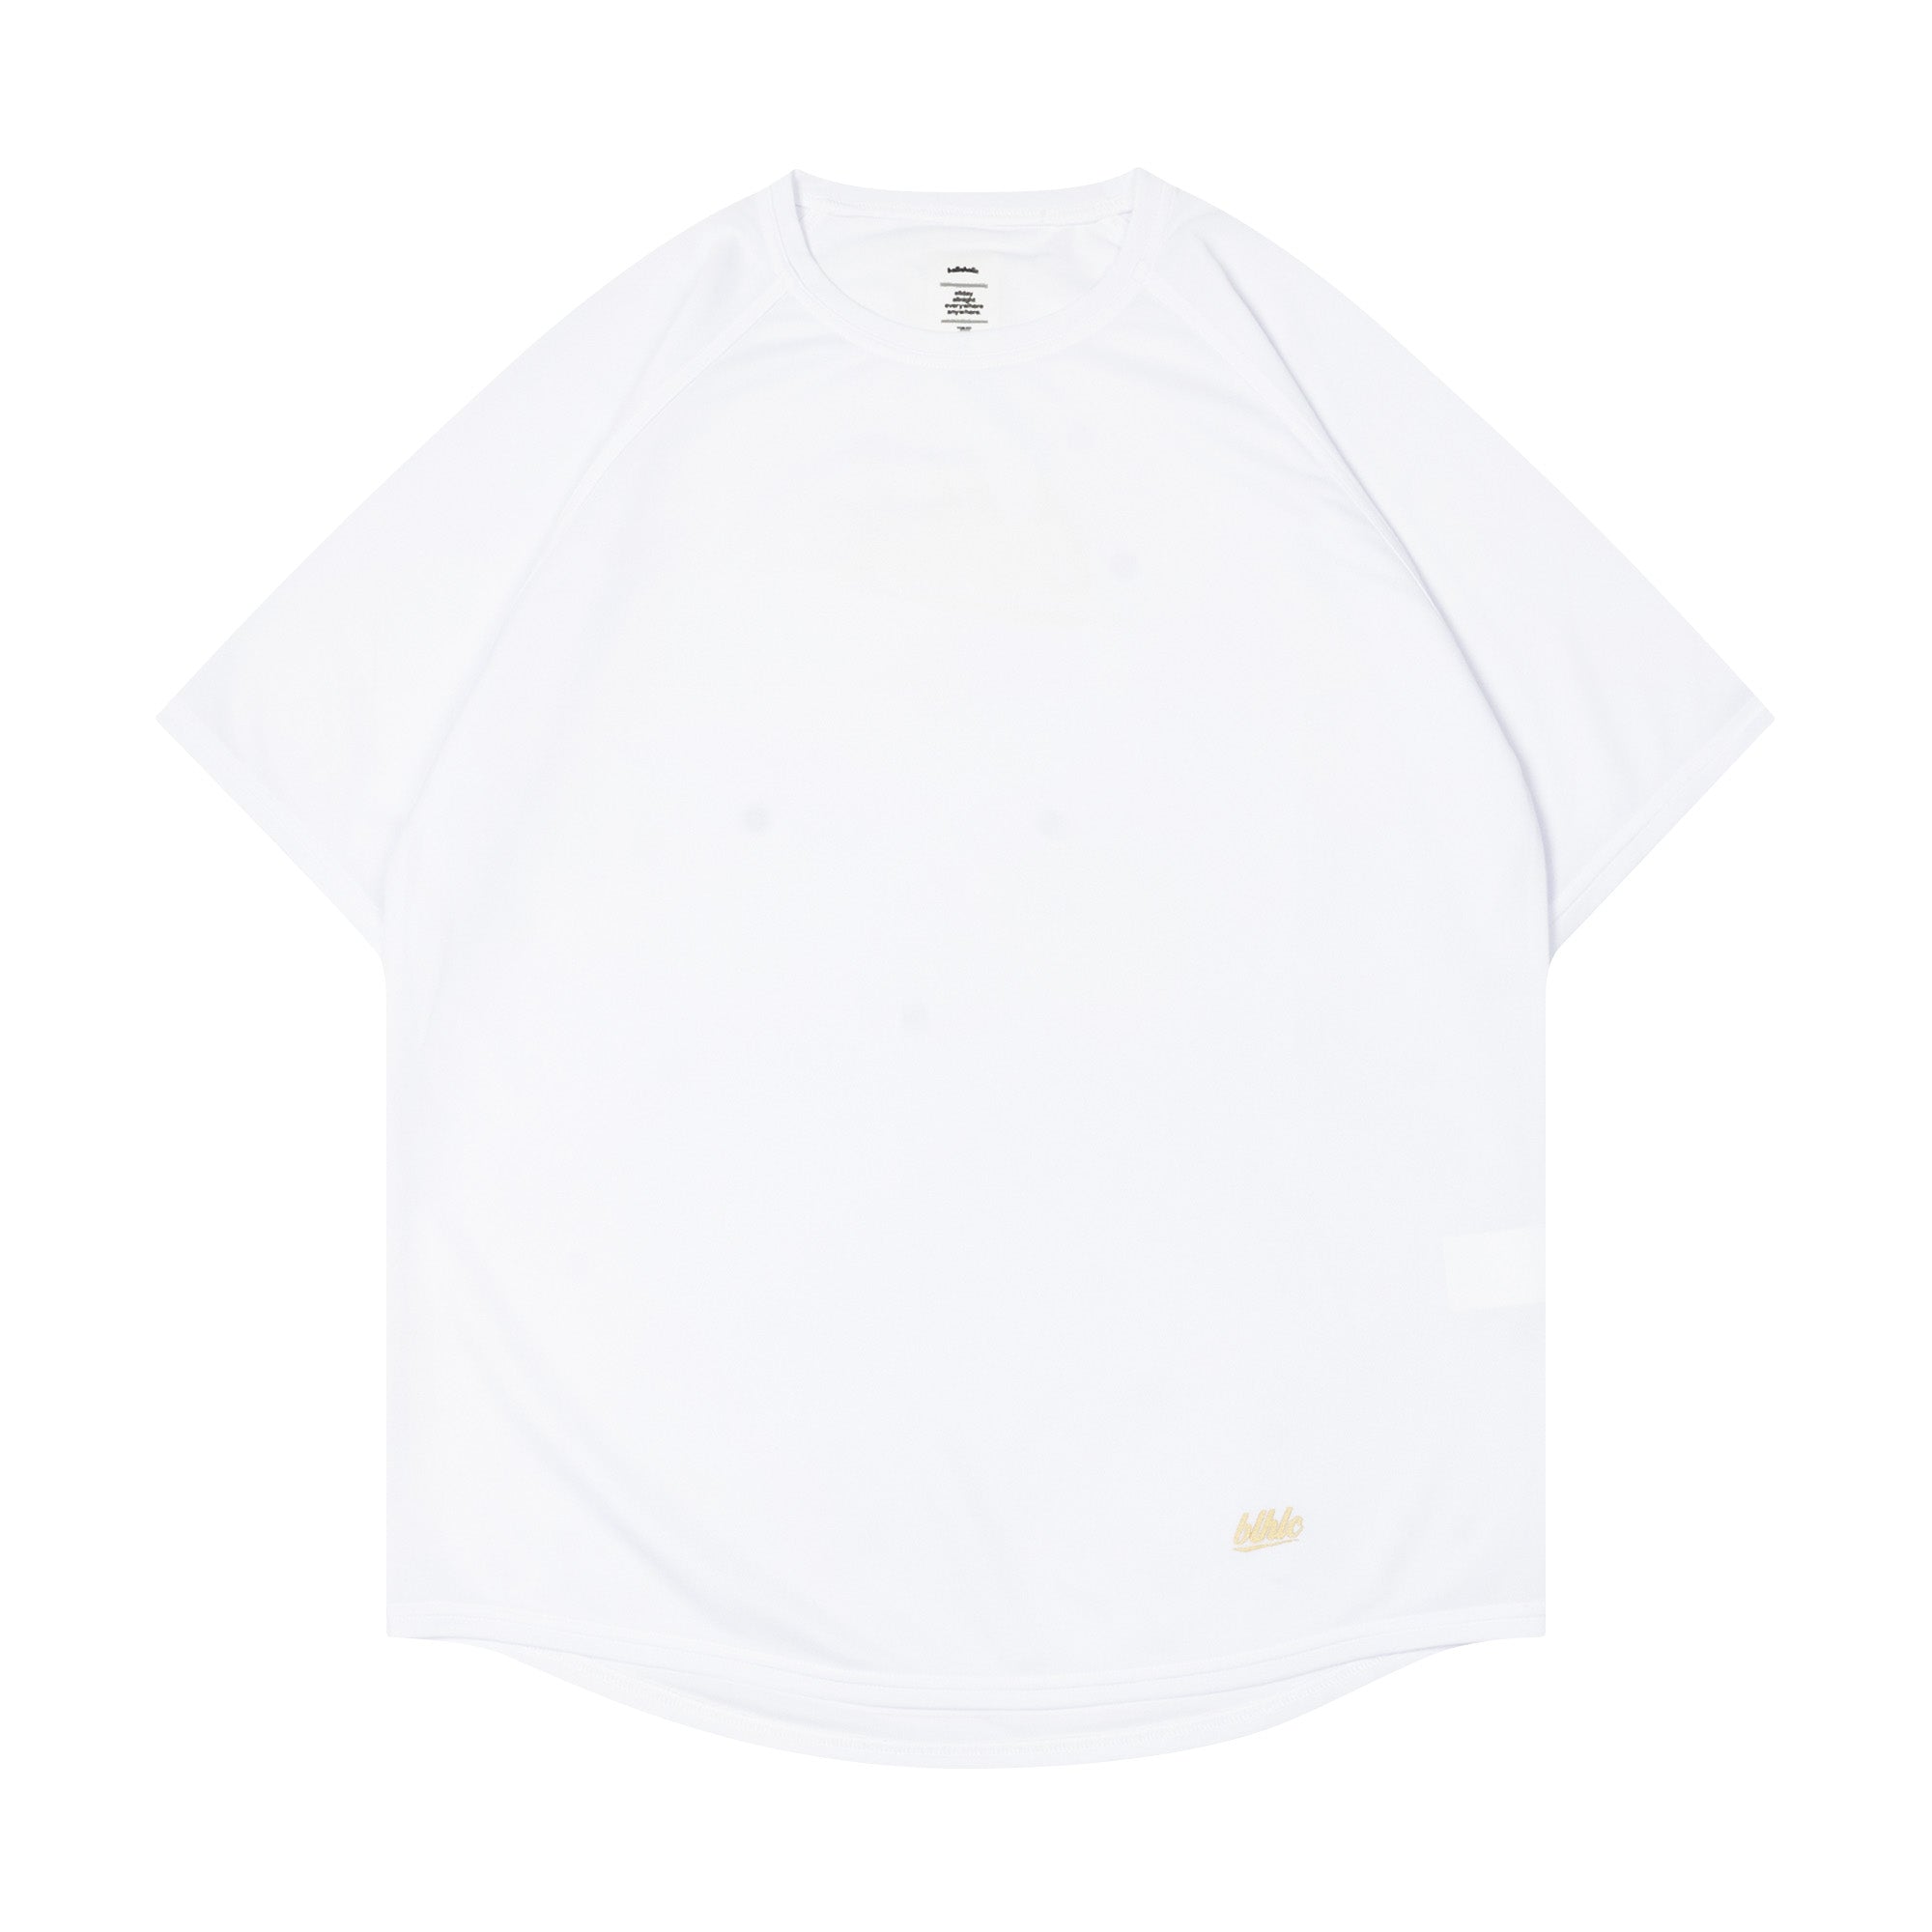 blhlc Back Print Cool Tee (white)